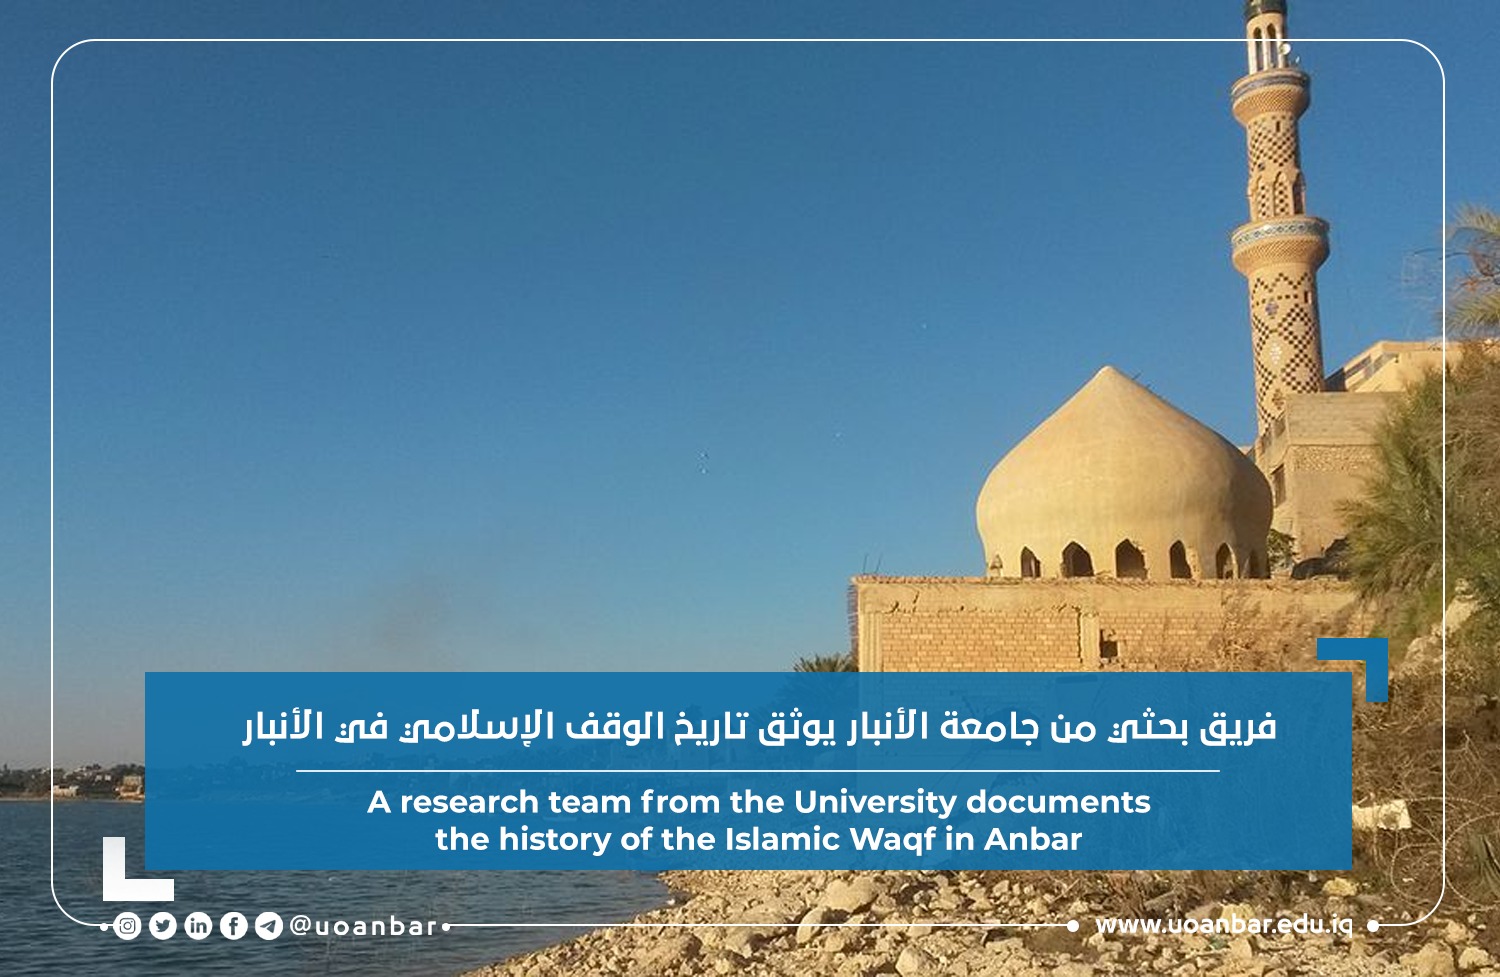 A research team from the University documents the history of the Islamic Waqf in Anbar